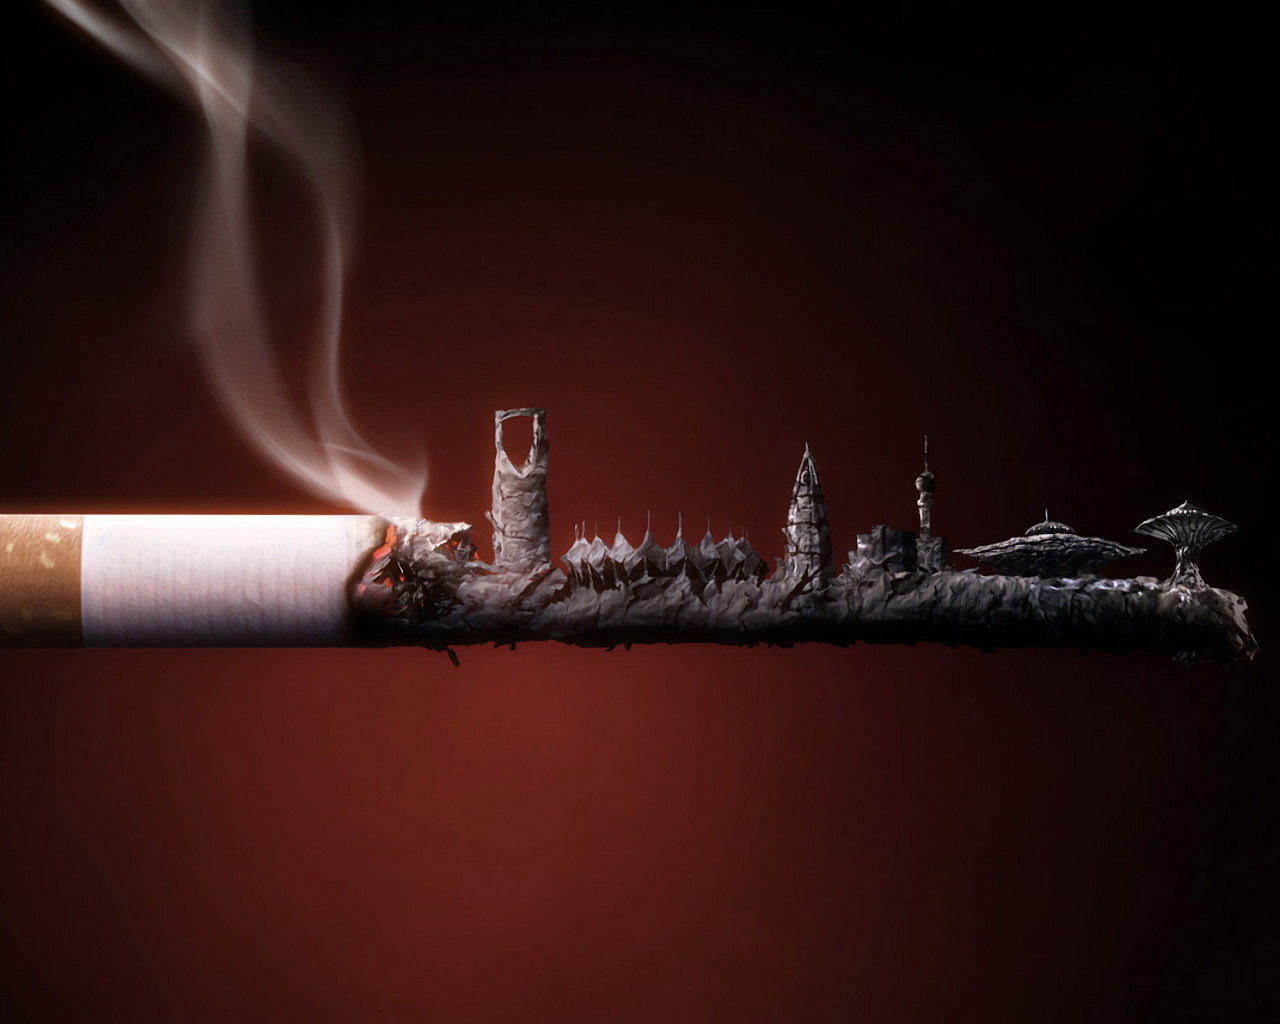 Smoked Cigarette backgrounds